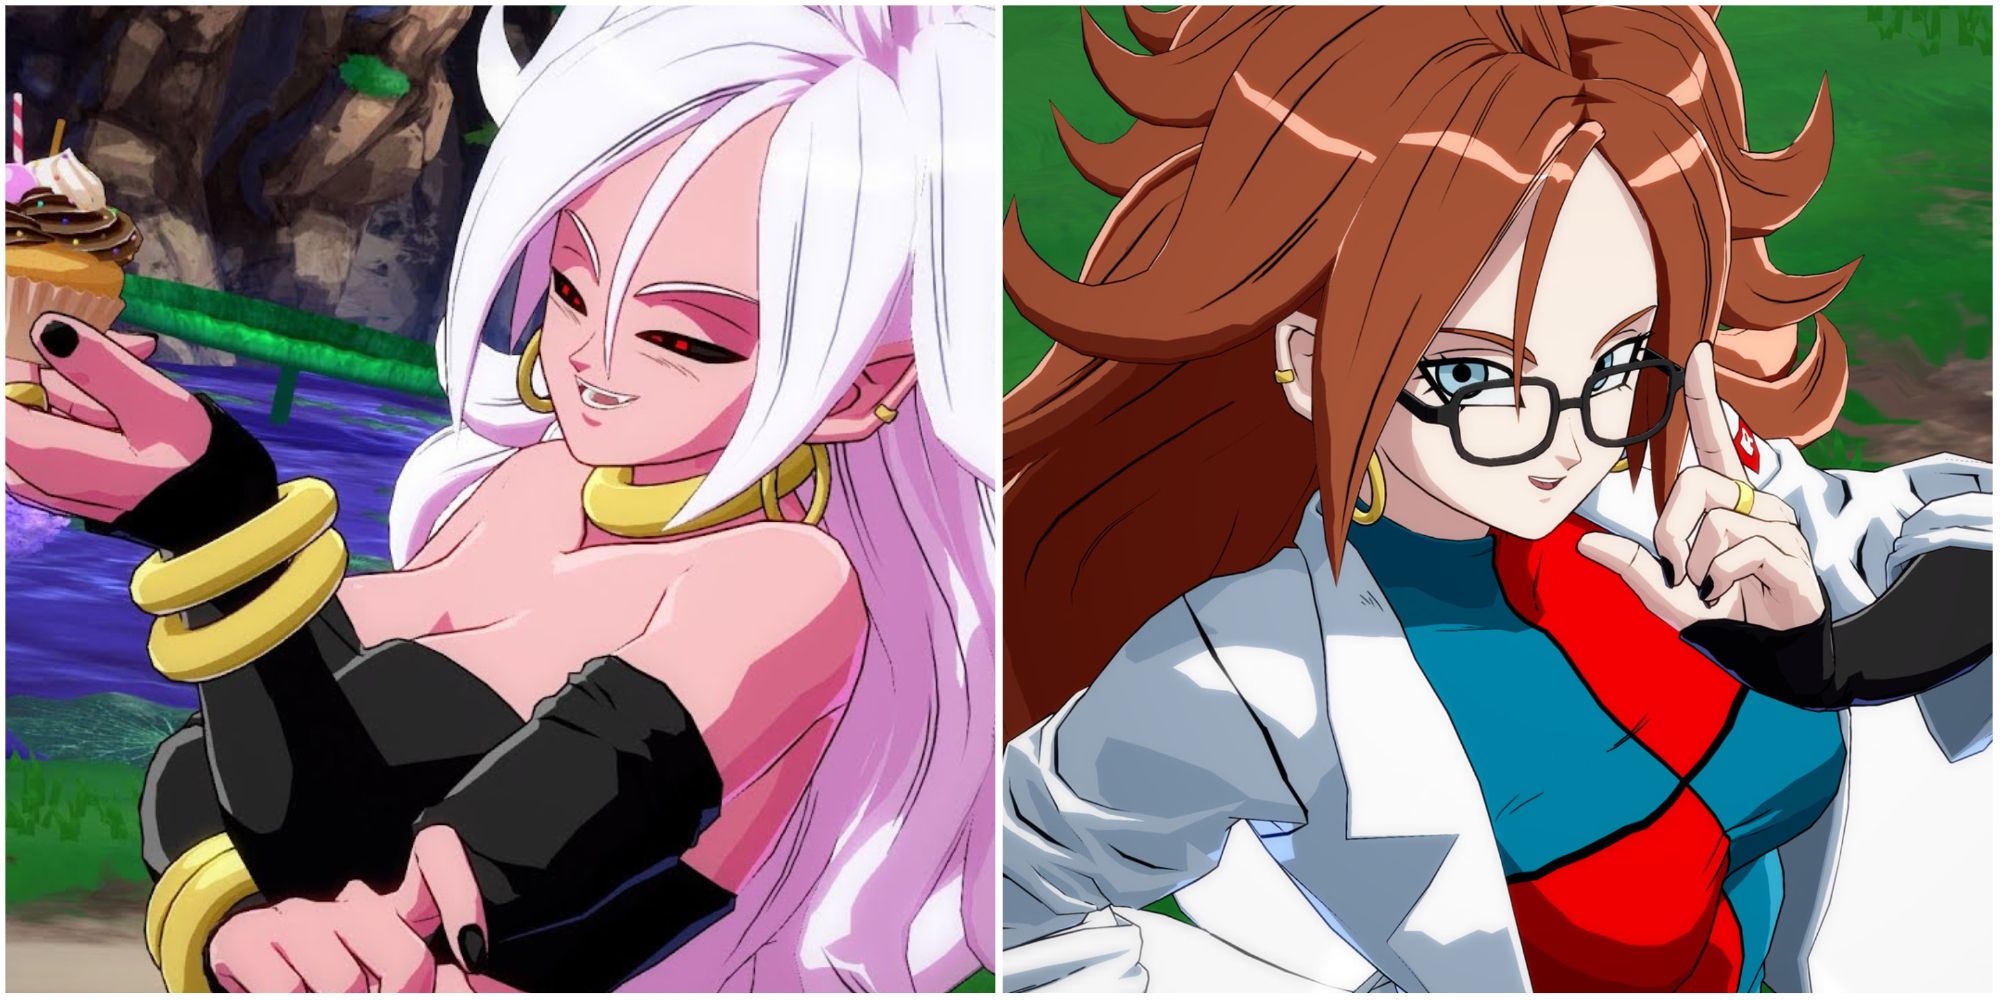 The two sides of Android 21 in Dragon Ball FighterZ